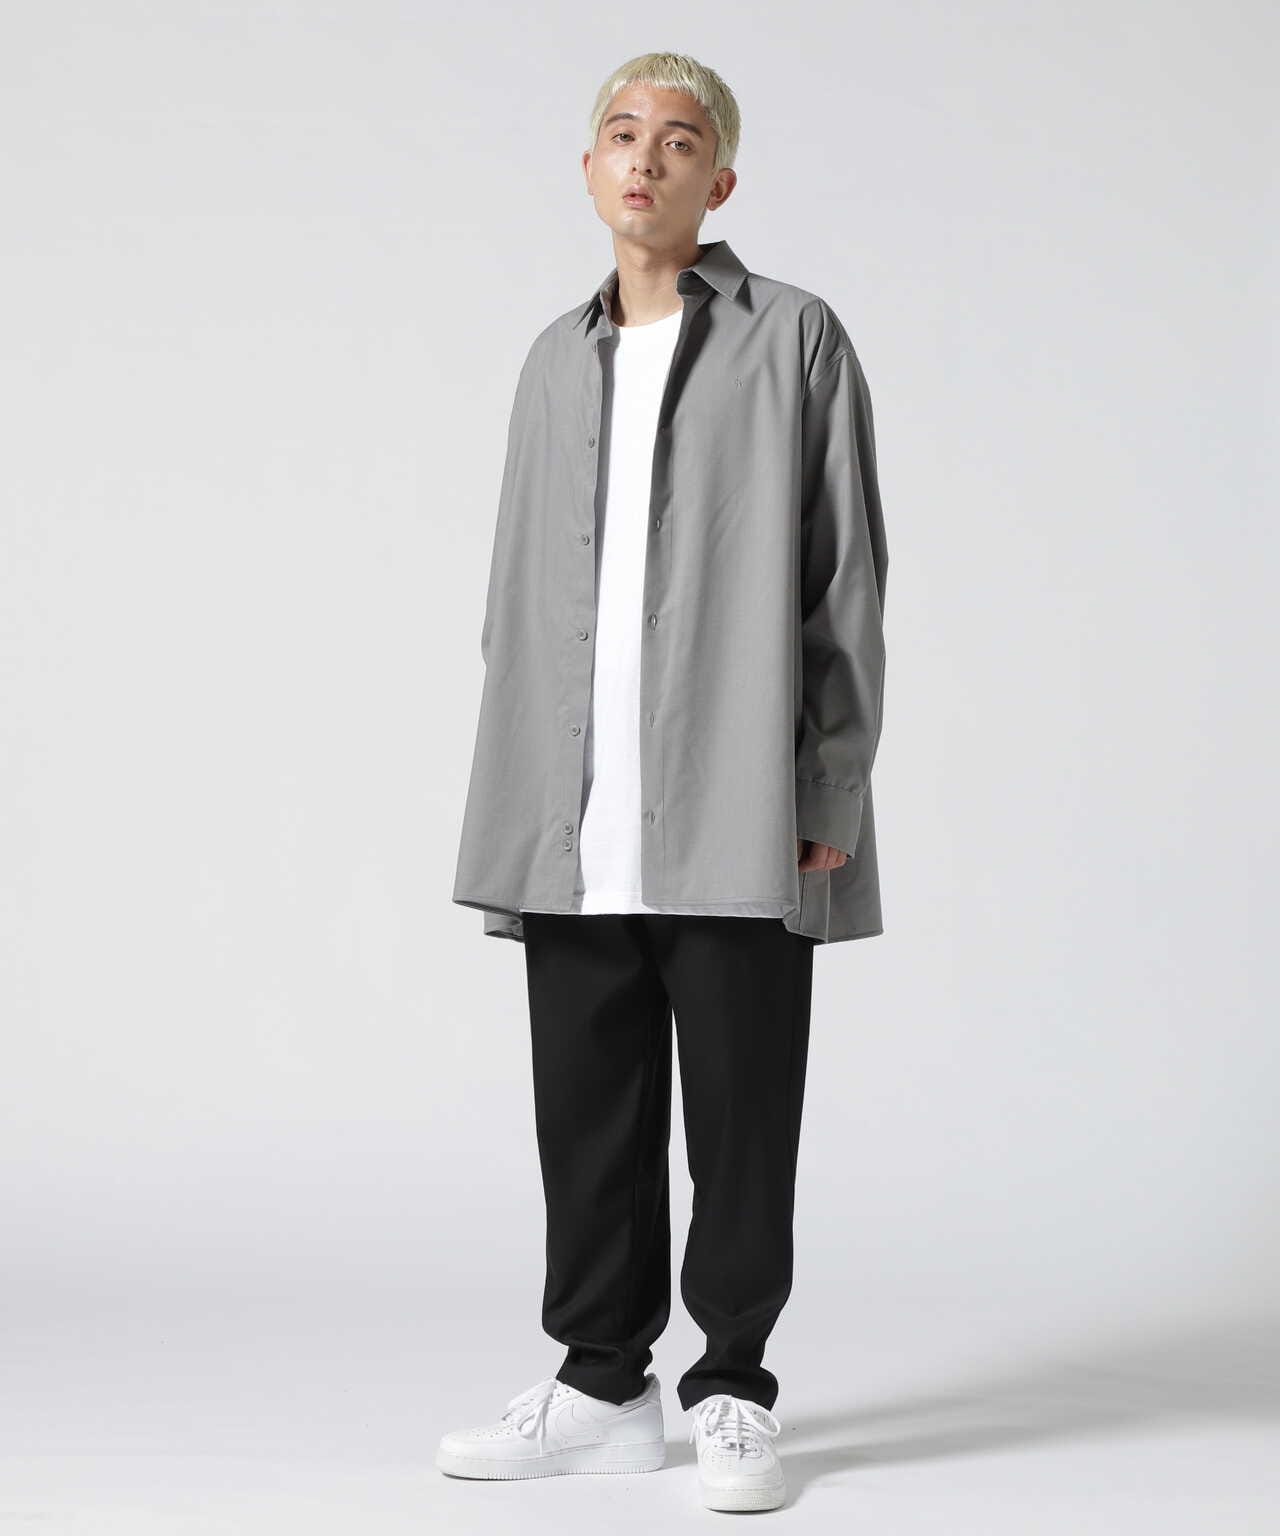 th products.stripe oversized shirt